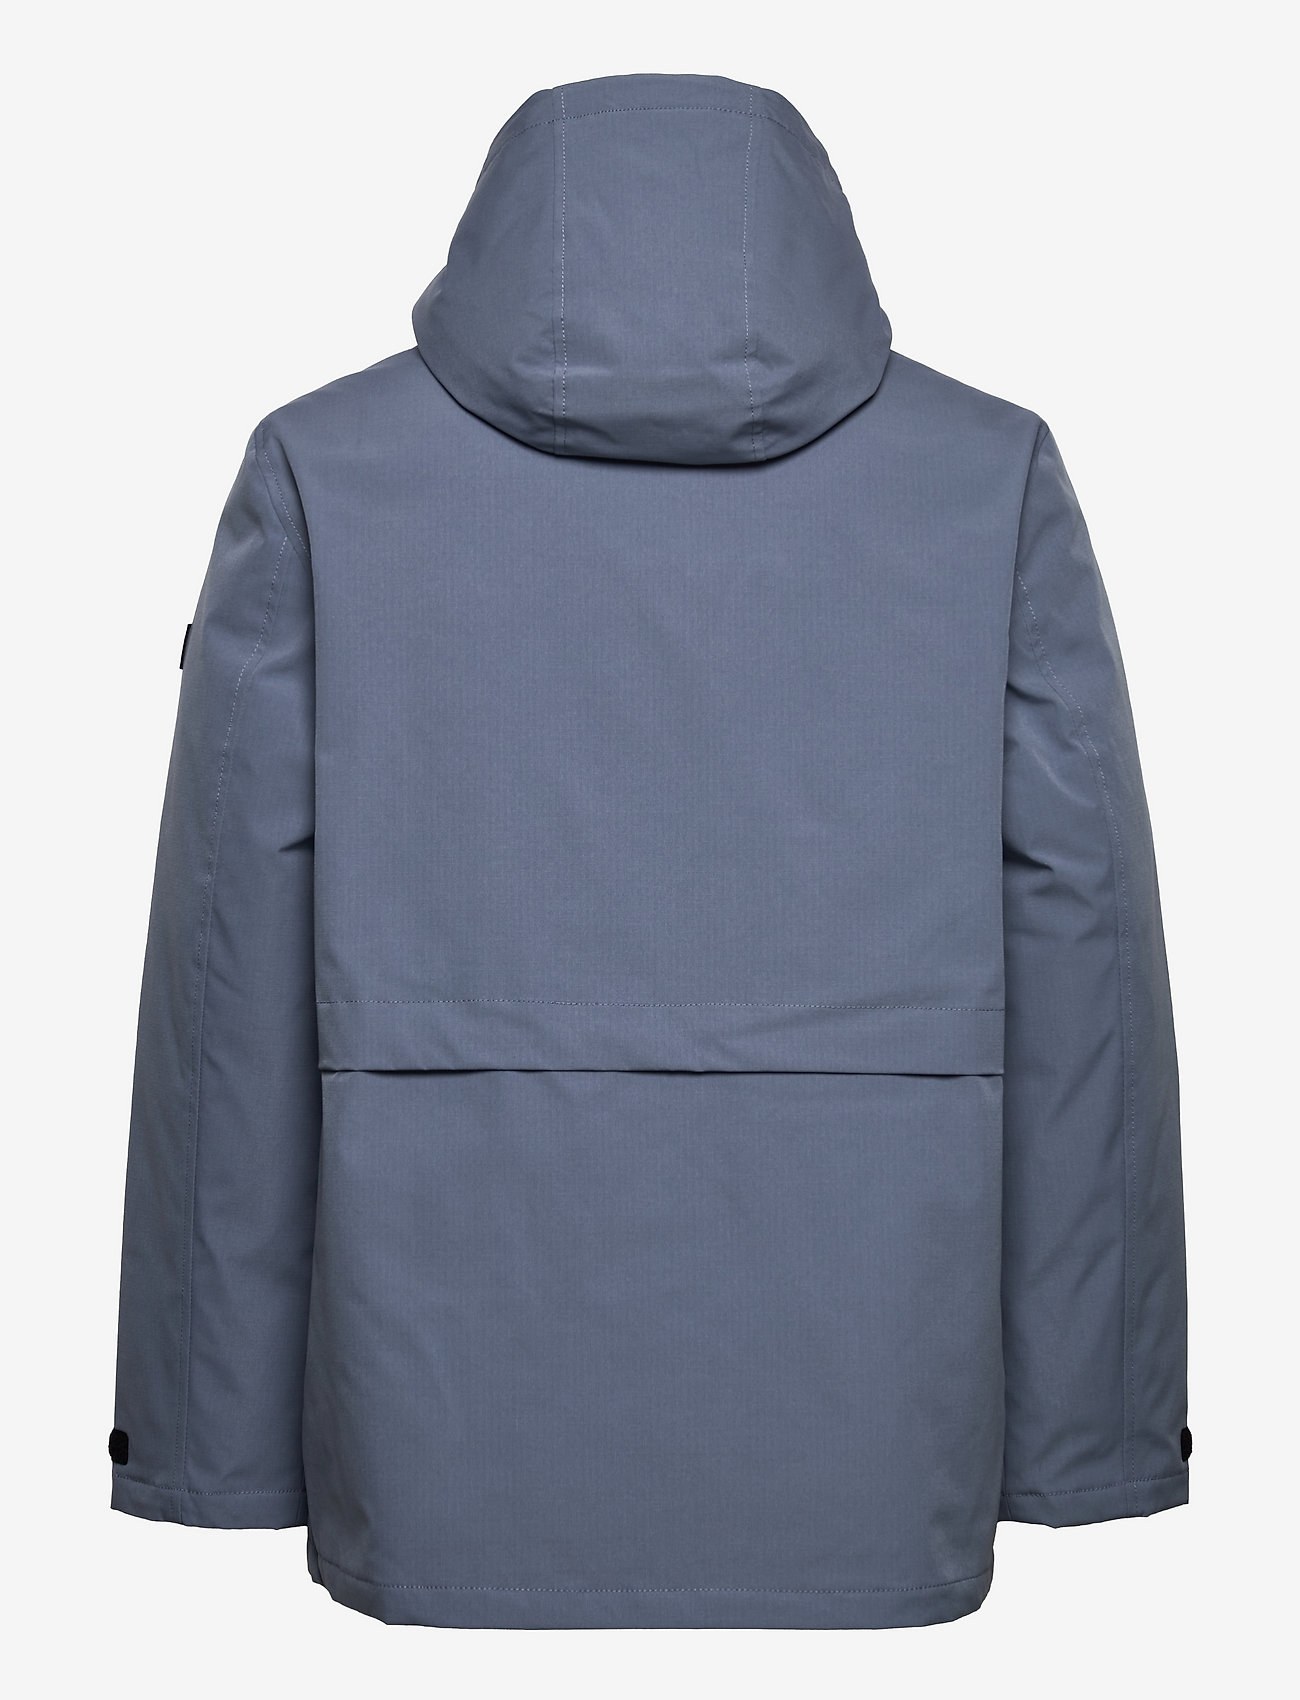 Esprit Casual - Recycled: jacket with down filling - winter jackets - grey blue - 1